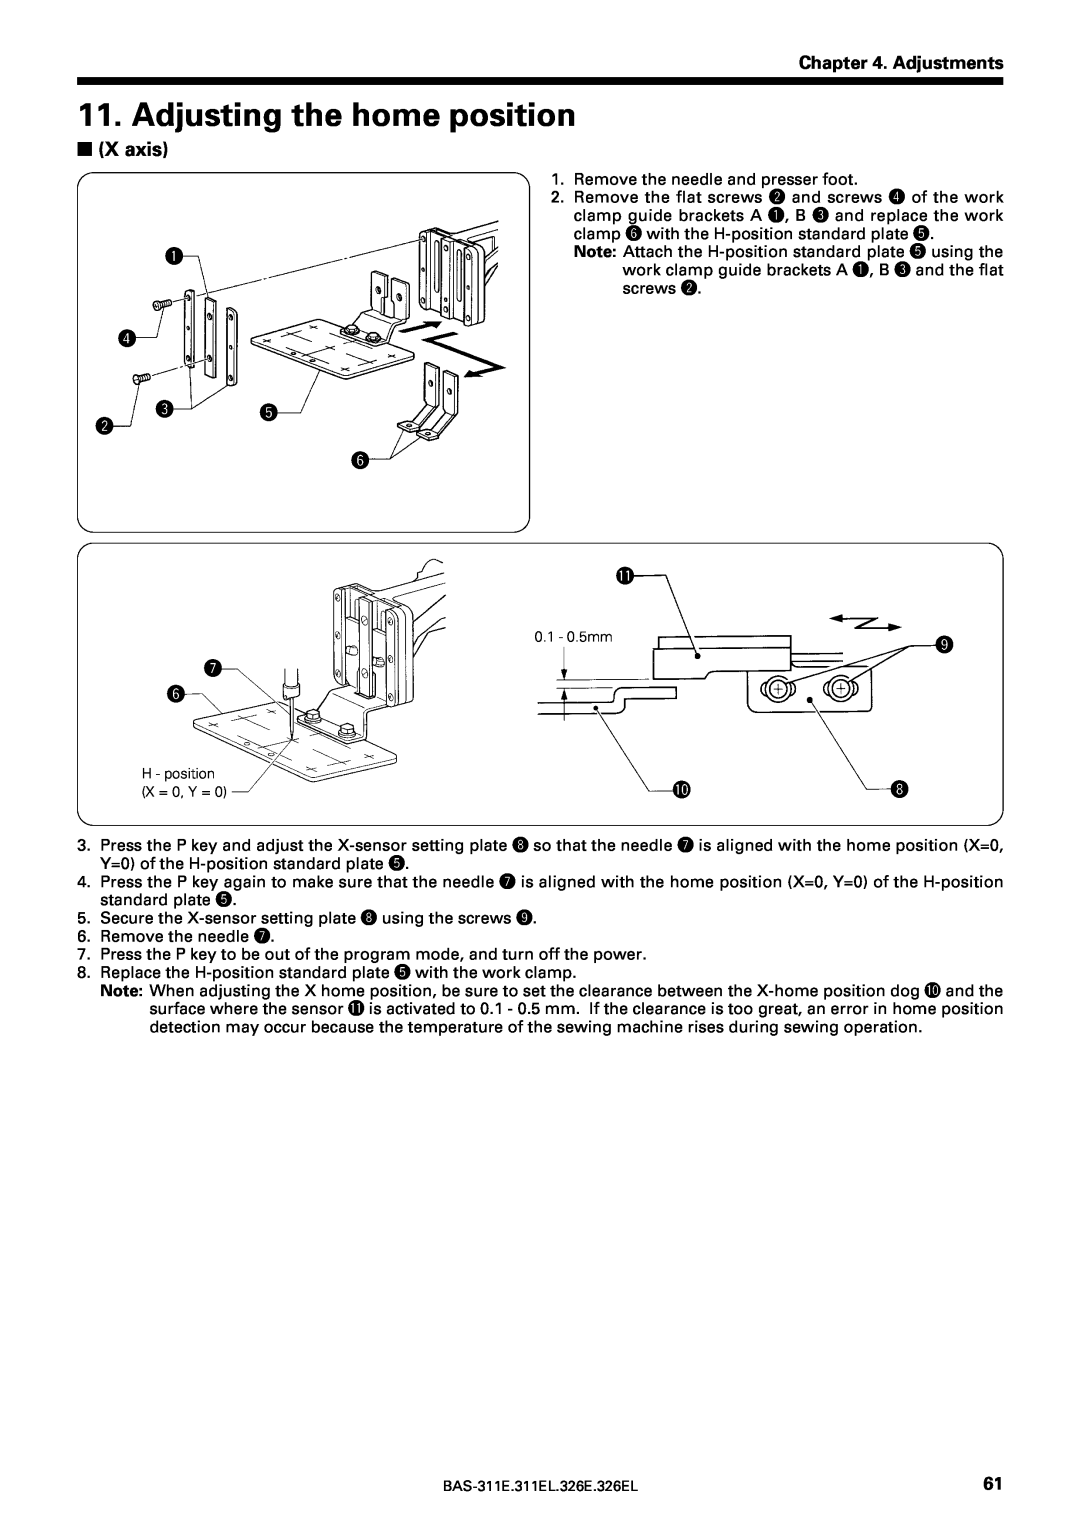 Brother BAS-311E service manual Adjusting the home position, X axis, Adjustments 